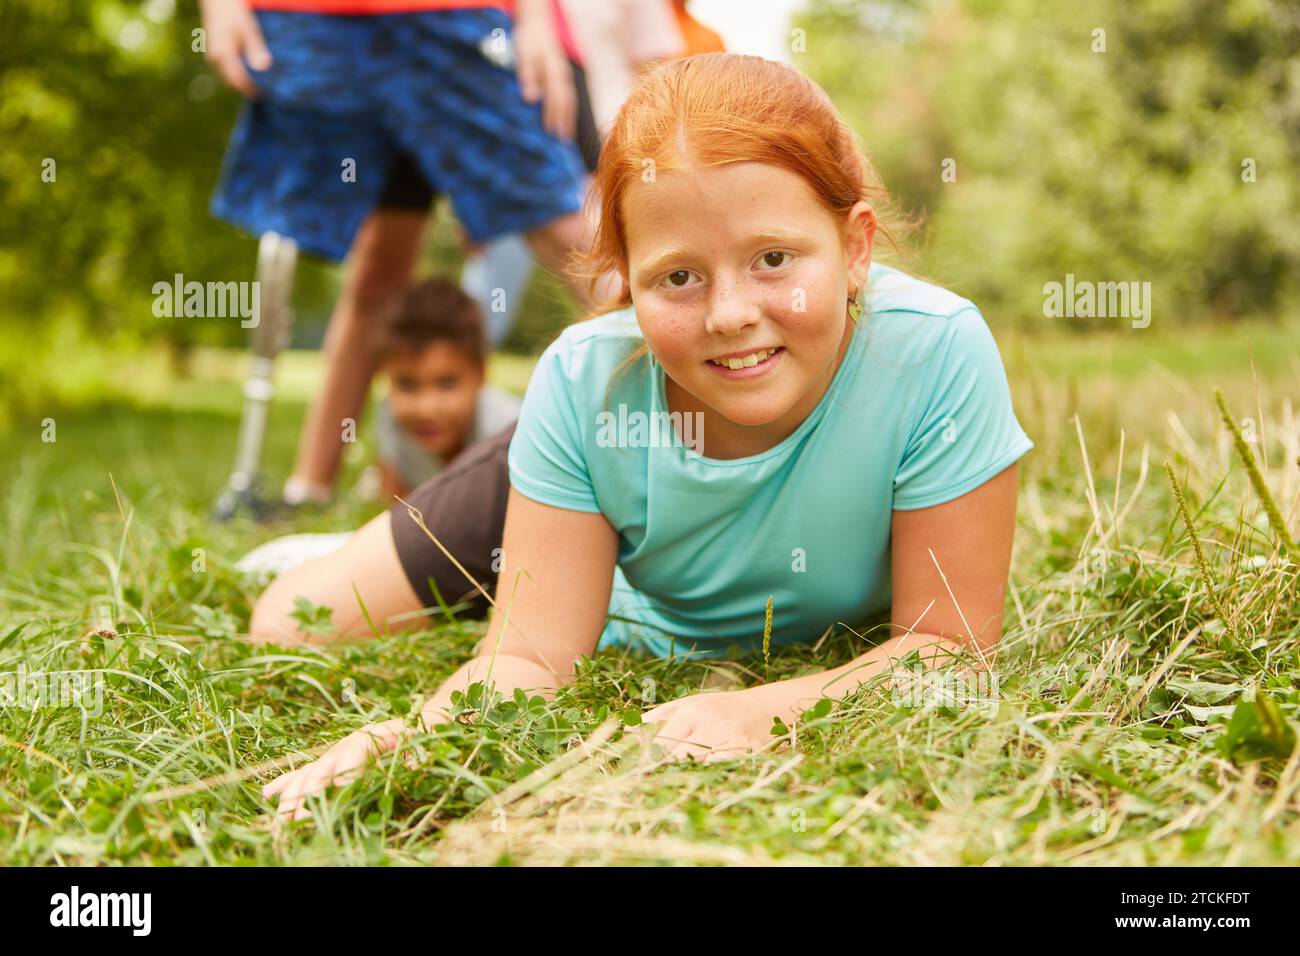 Portrait of smiling redhead girl lying down on grass at park Stock Photo